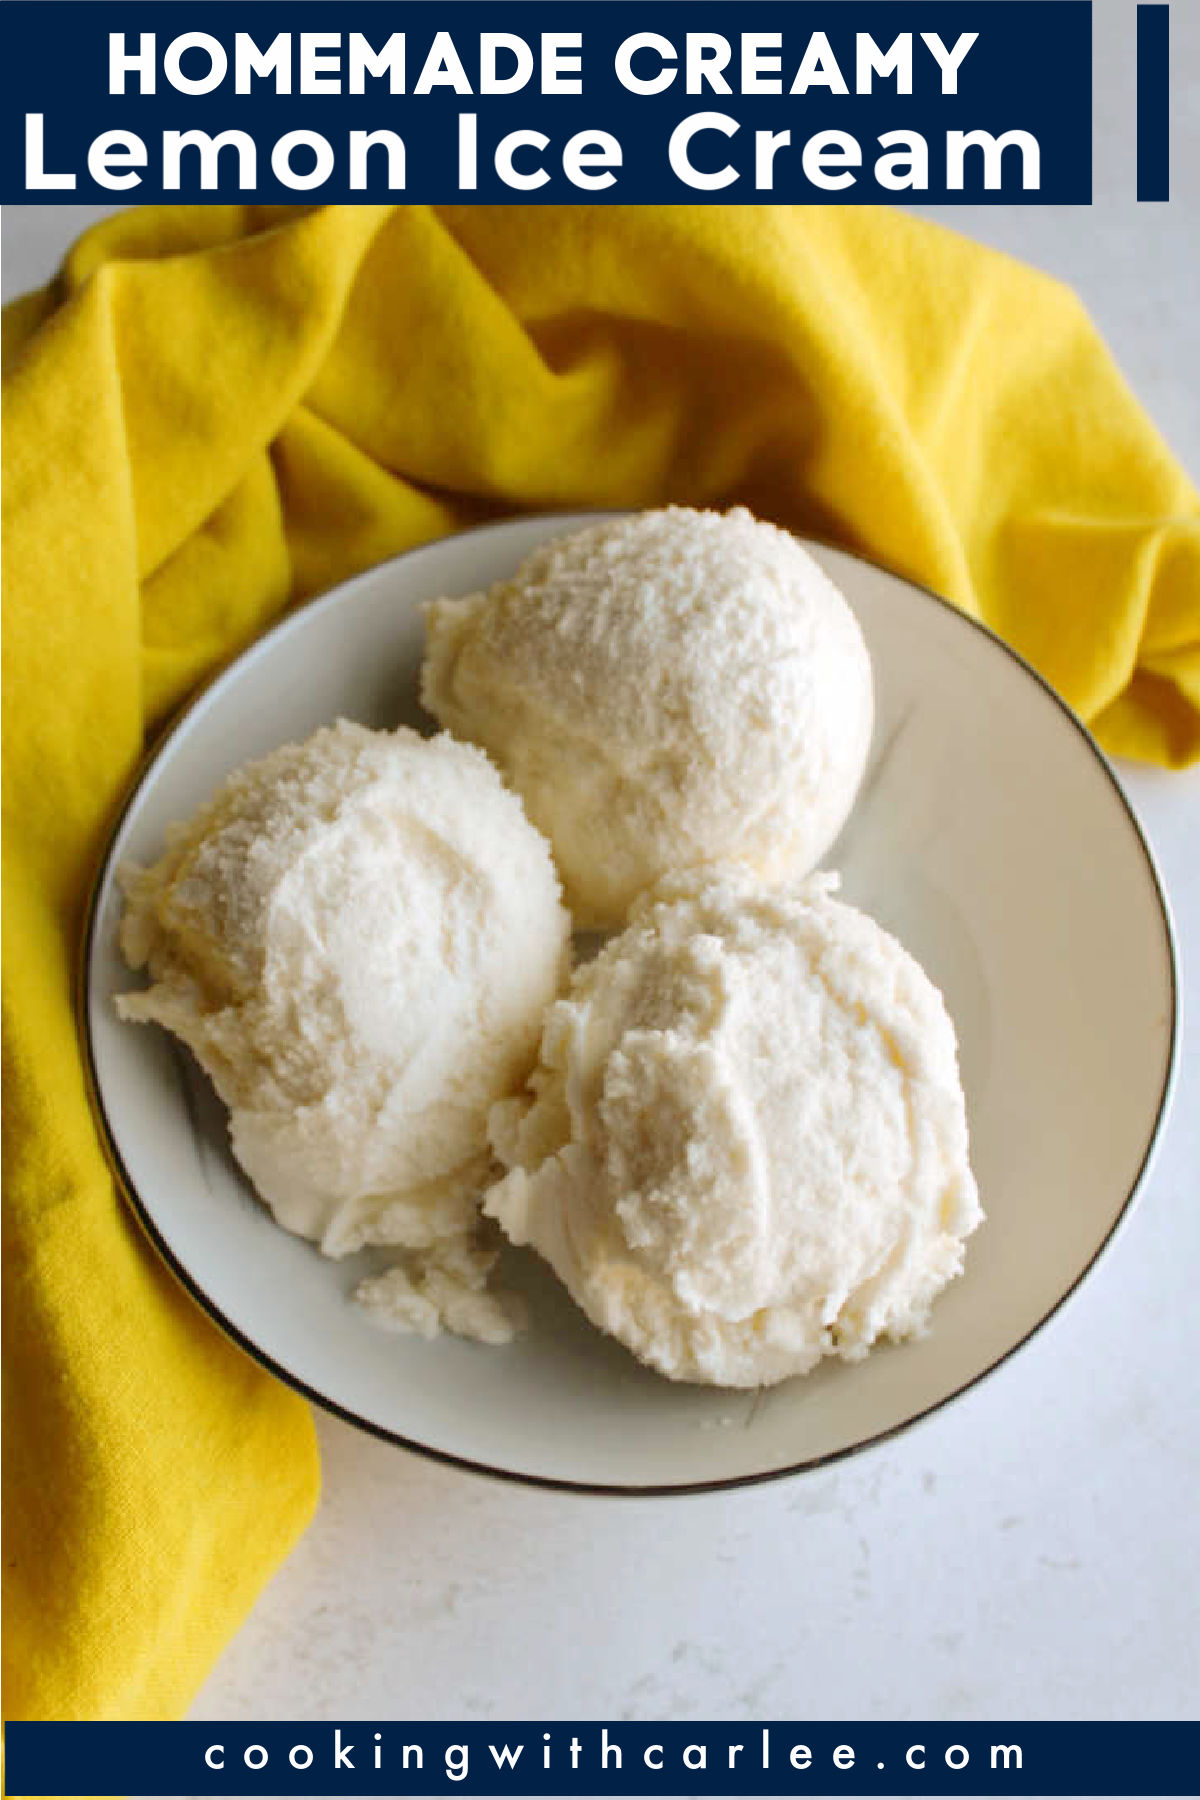 If you love a good citrus dessert, you are in for a treat. This ice cream is simple as can be to make and has a big blast of lemony flavor.  The texture is smooth and creamy.  It really is just about as good as it gets.  Whip up a batch to see for yourself.